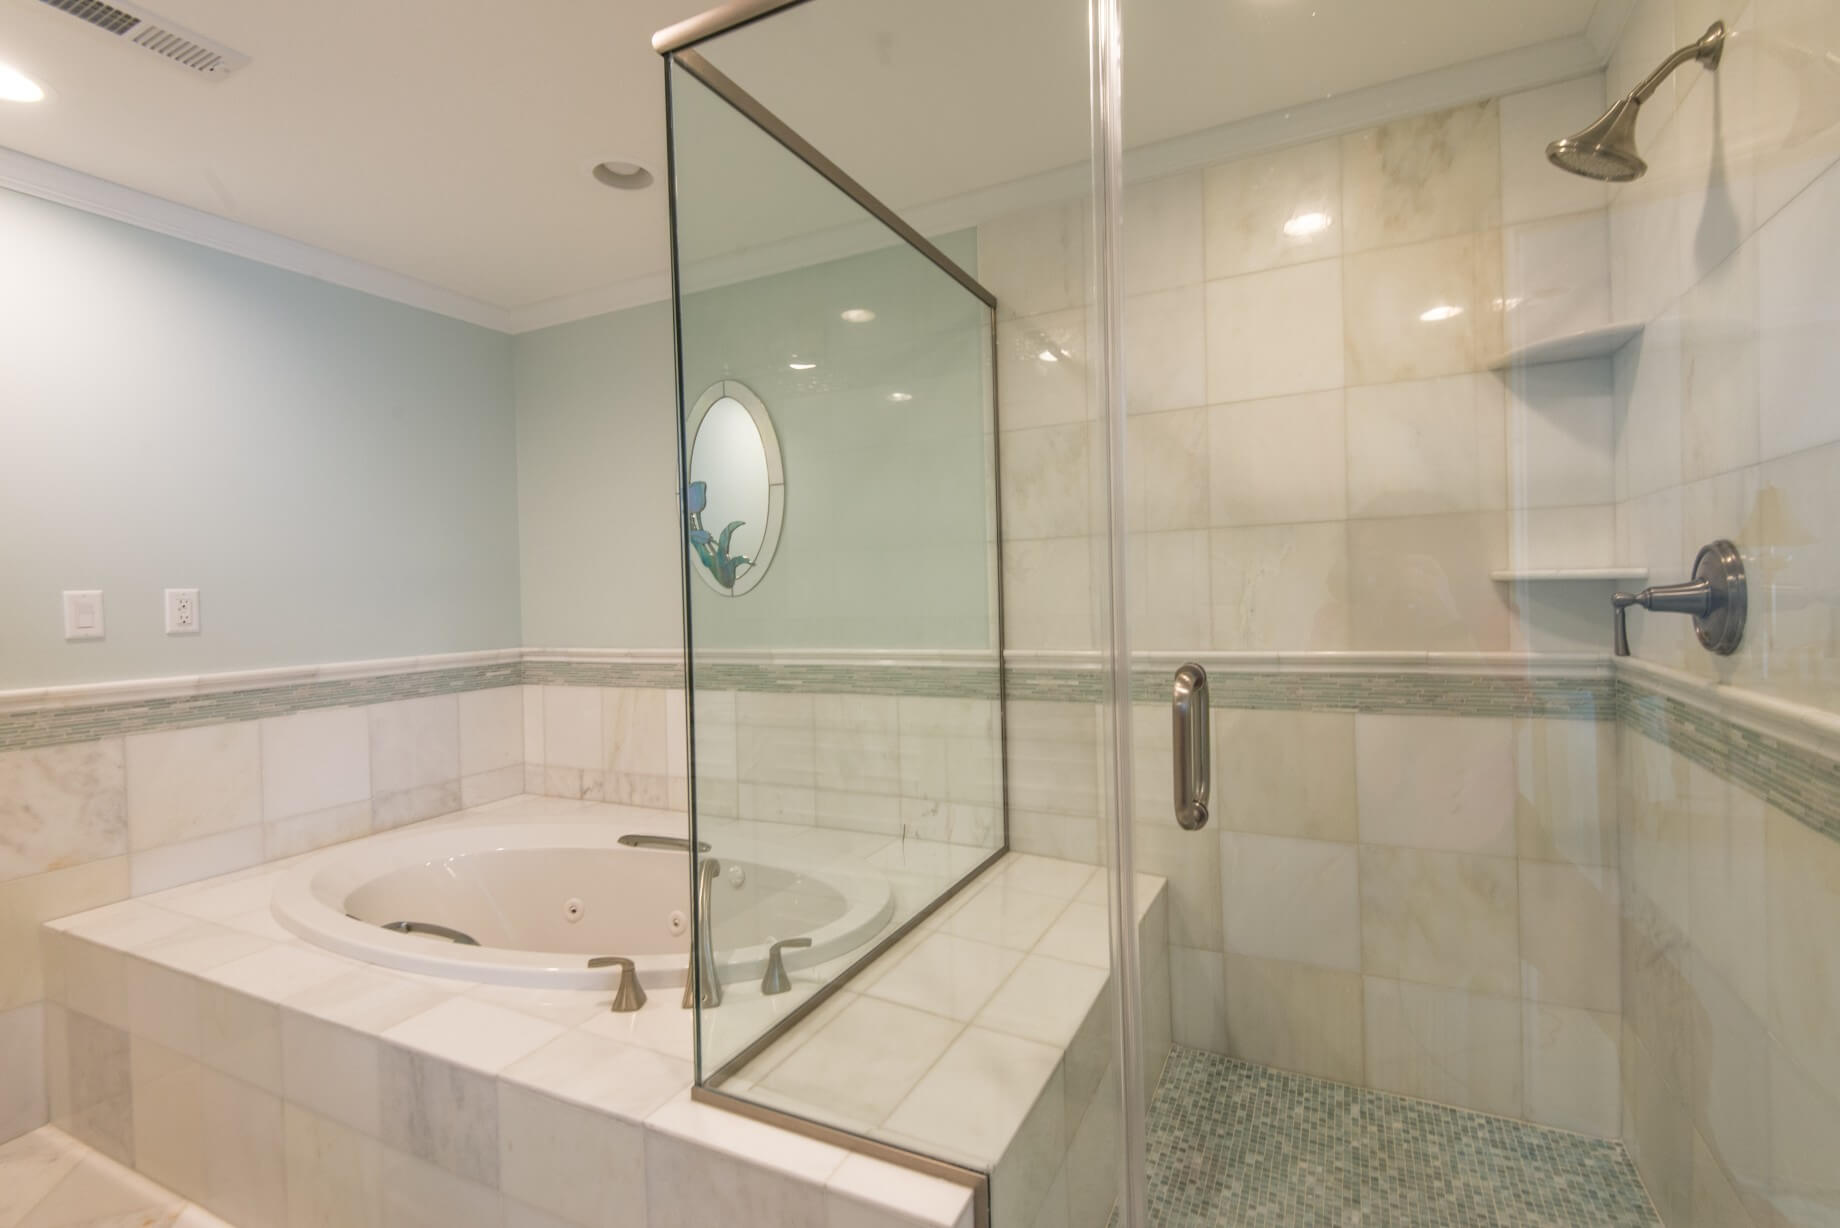 Kings Grant Renovation Vol.1 Bathroom with White Marble Wall and Floor Tiles, Tub and Frameless Glass Shower Door